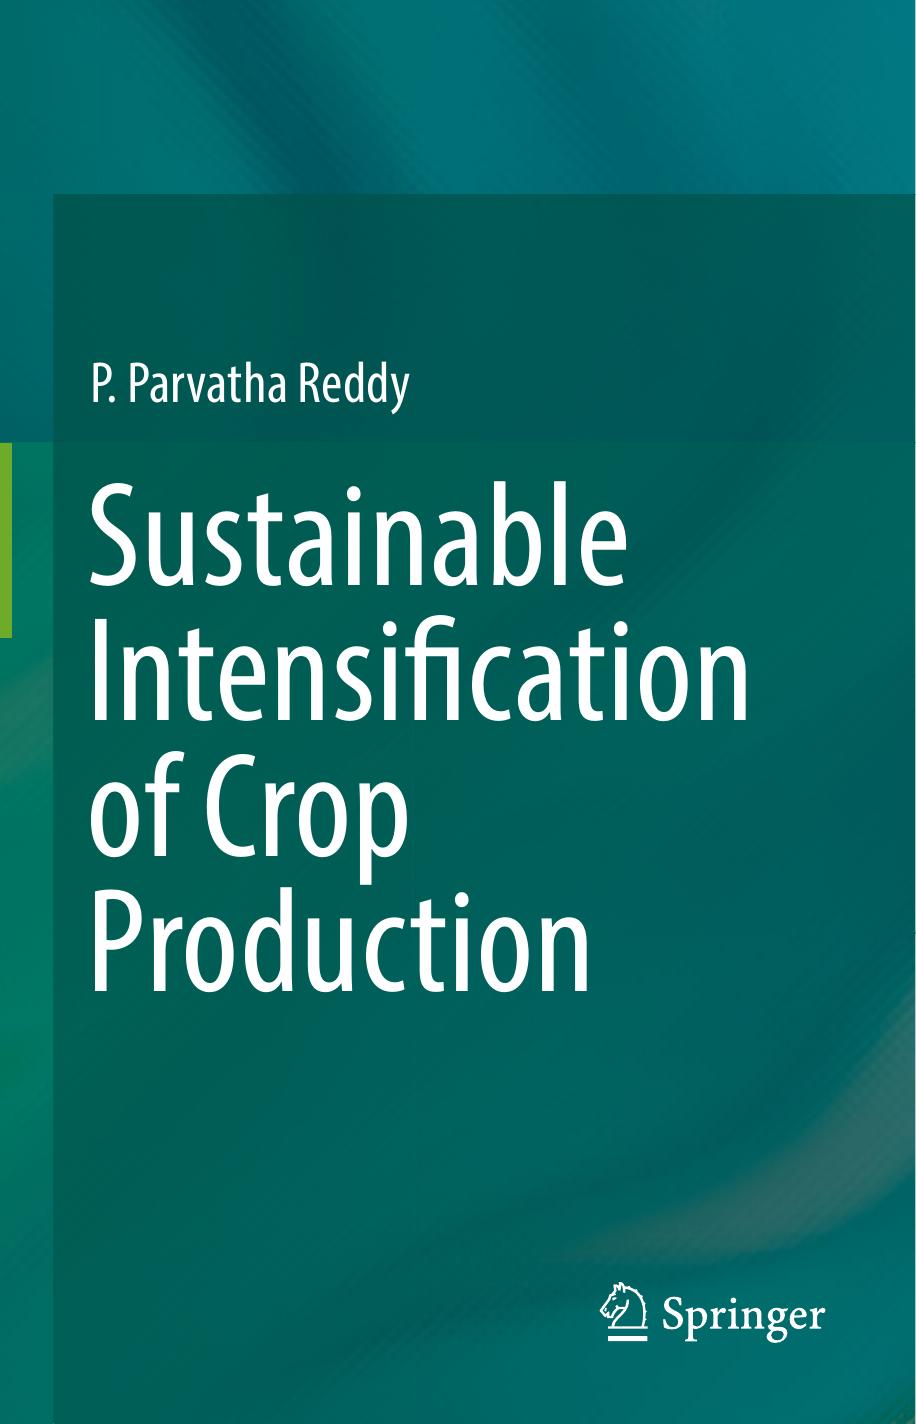 Sustainable Intensification of Crop Production ( PDFDrive ), 2016